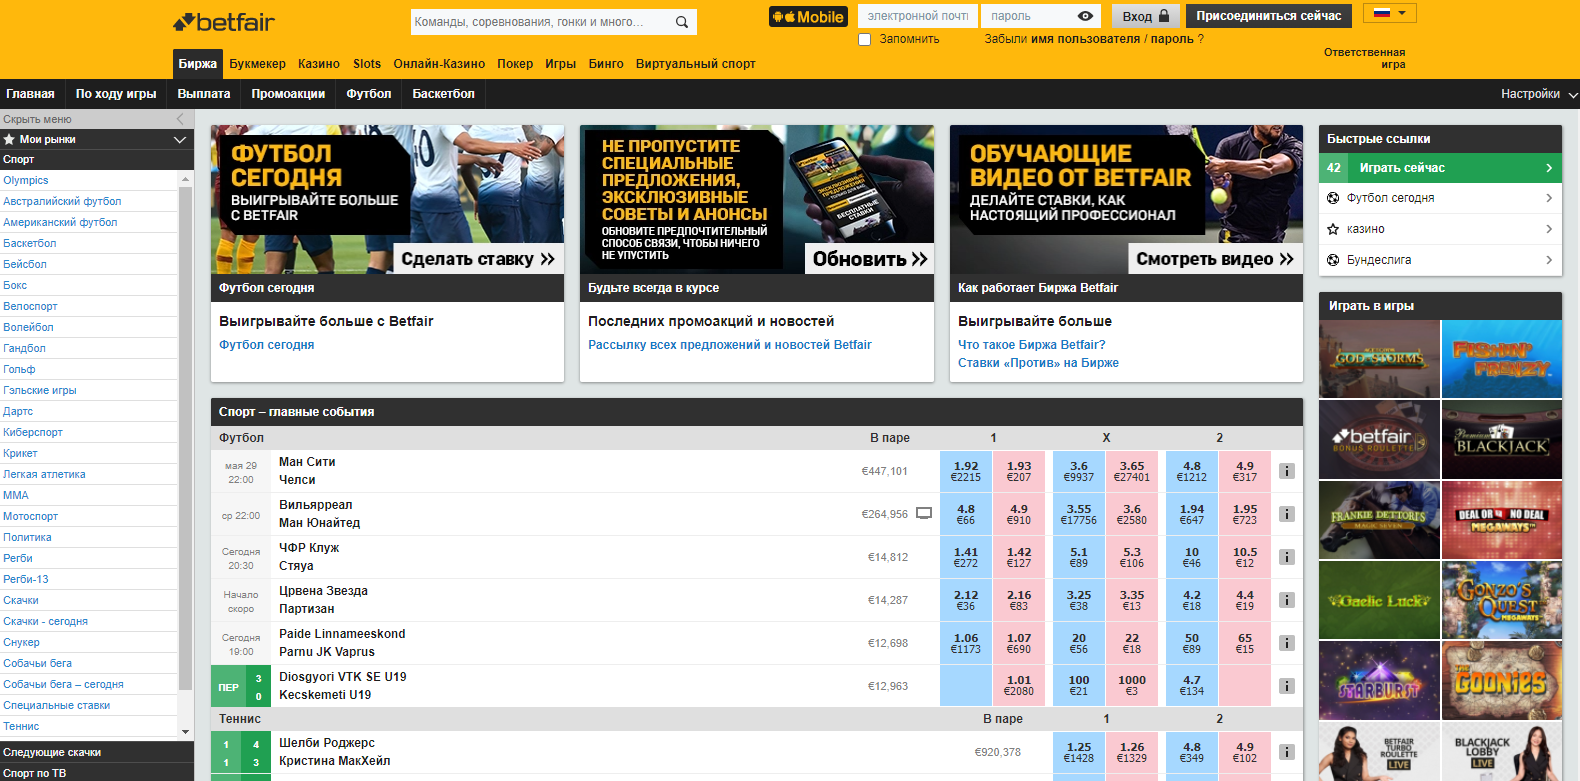 Betfair for Android in the 